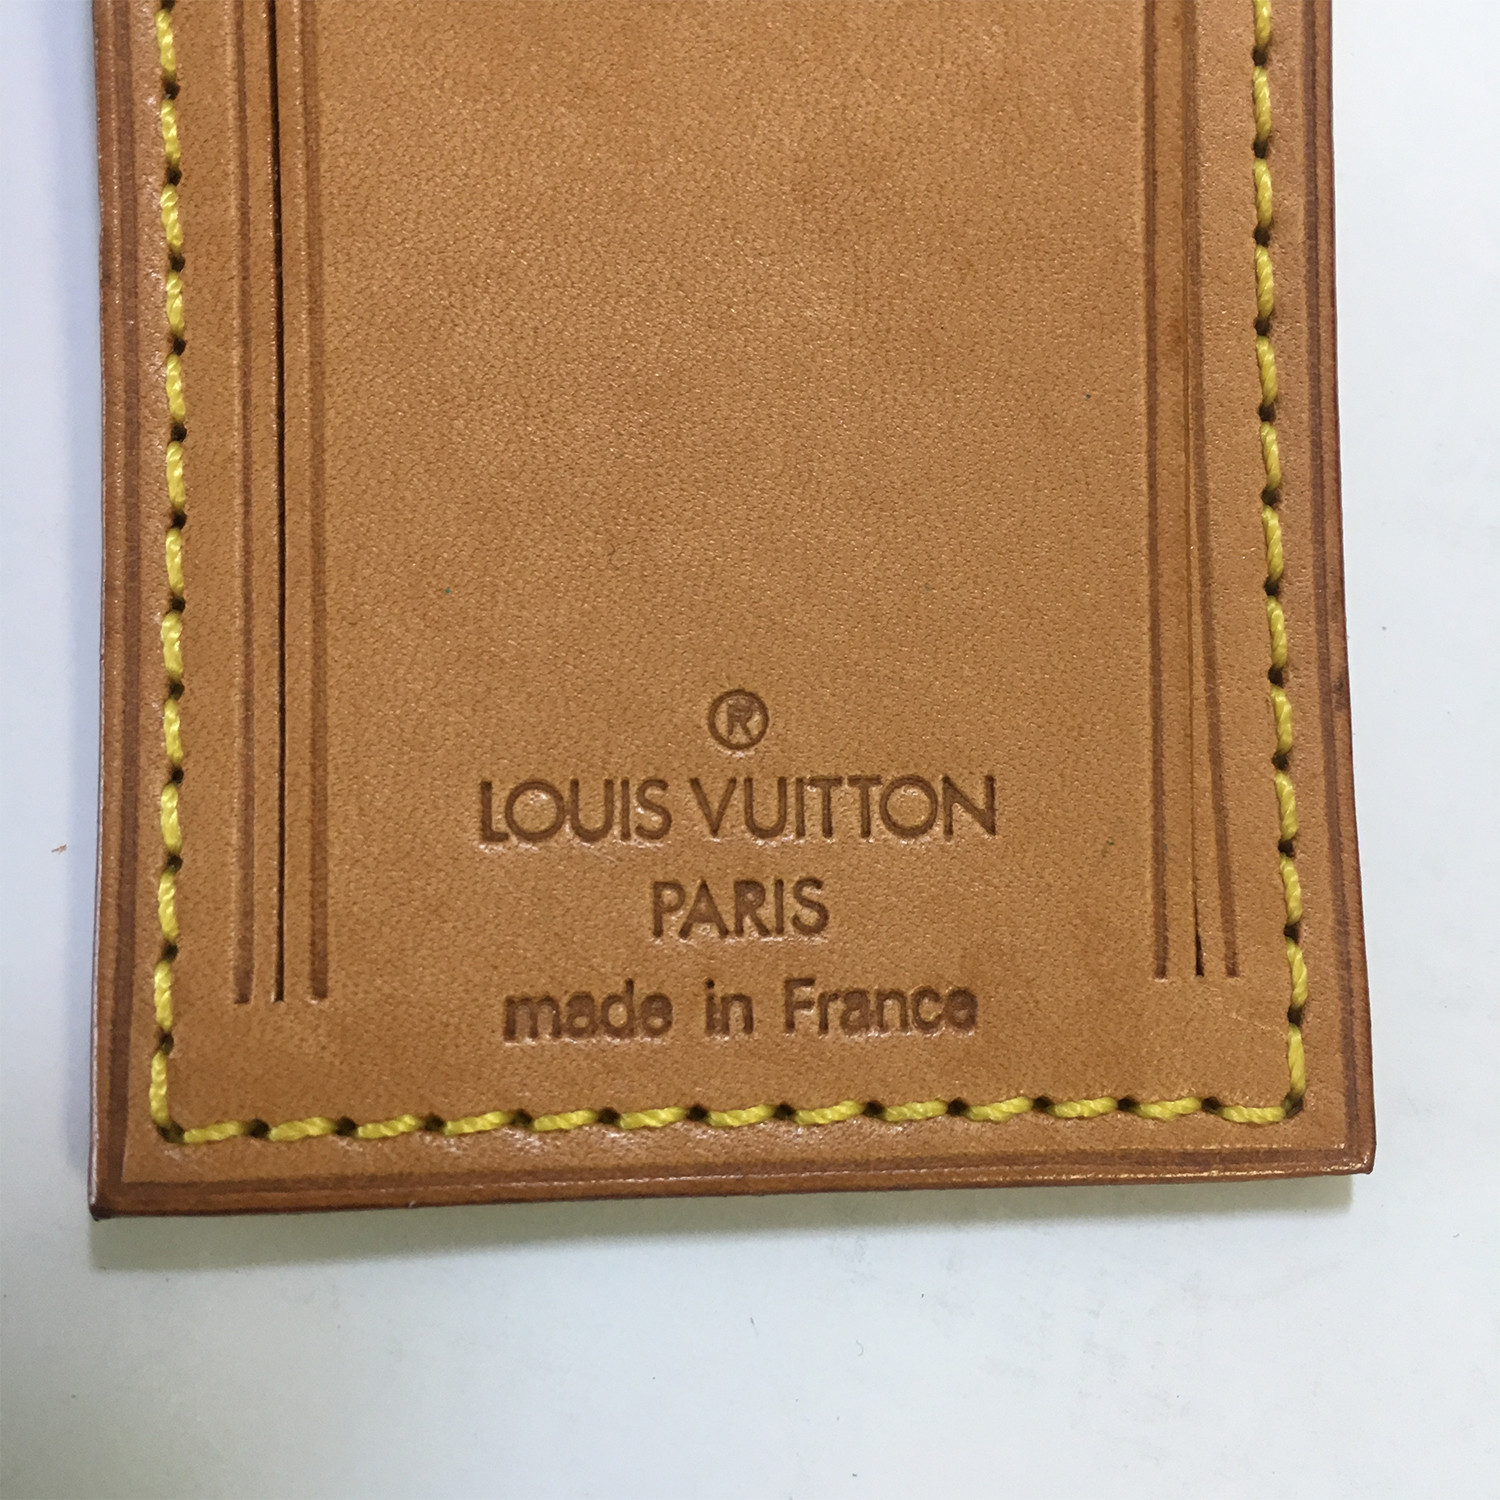 Louis Vuitton Vachetta Leather Luggage Tag & Handle Keeper (2